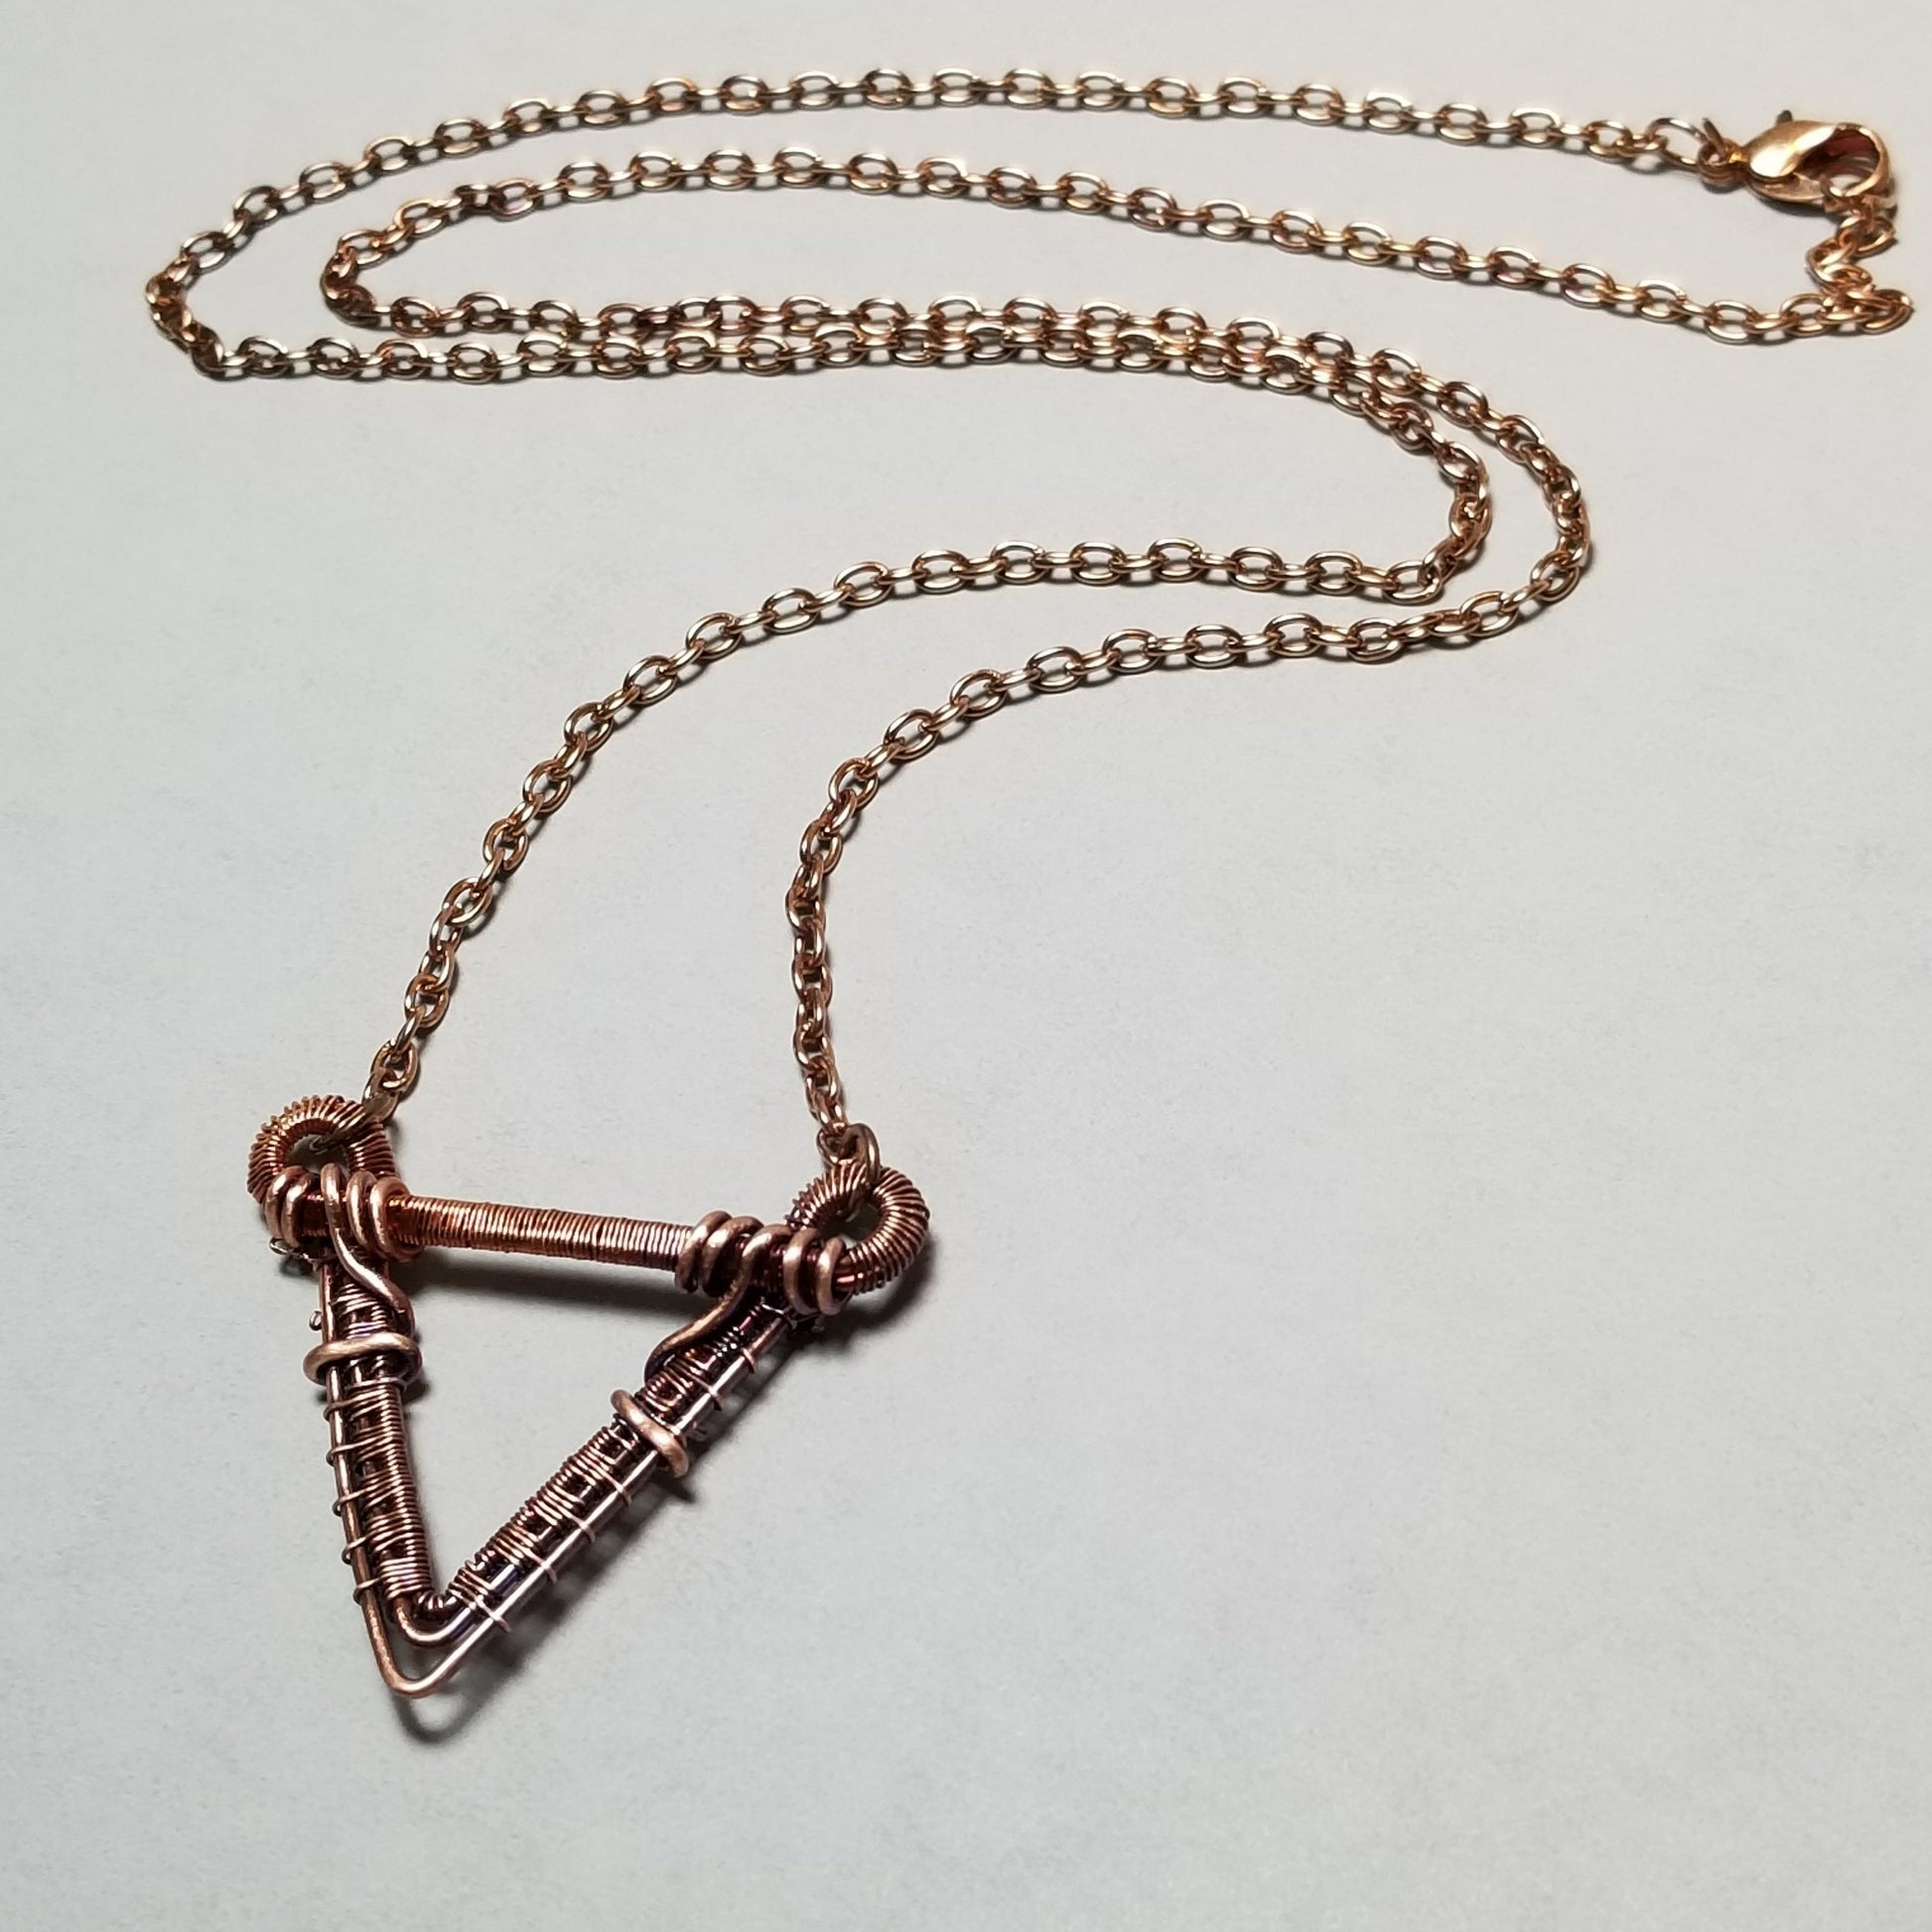 Cordial Design Jewelry Accessories/Crystal Copper Chain/Geometry